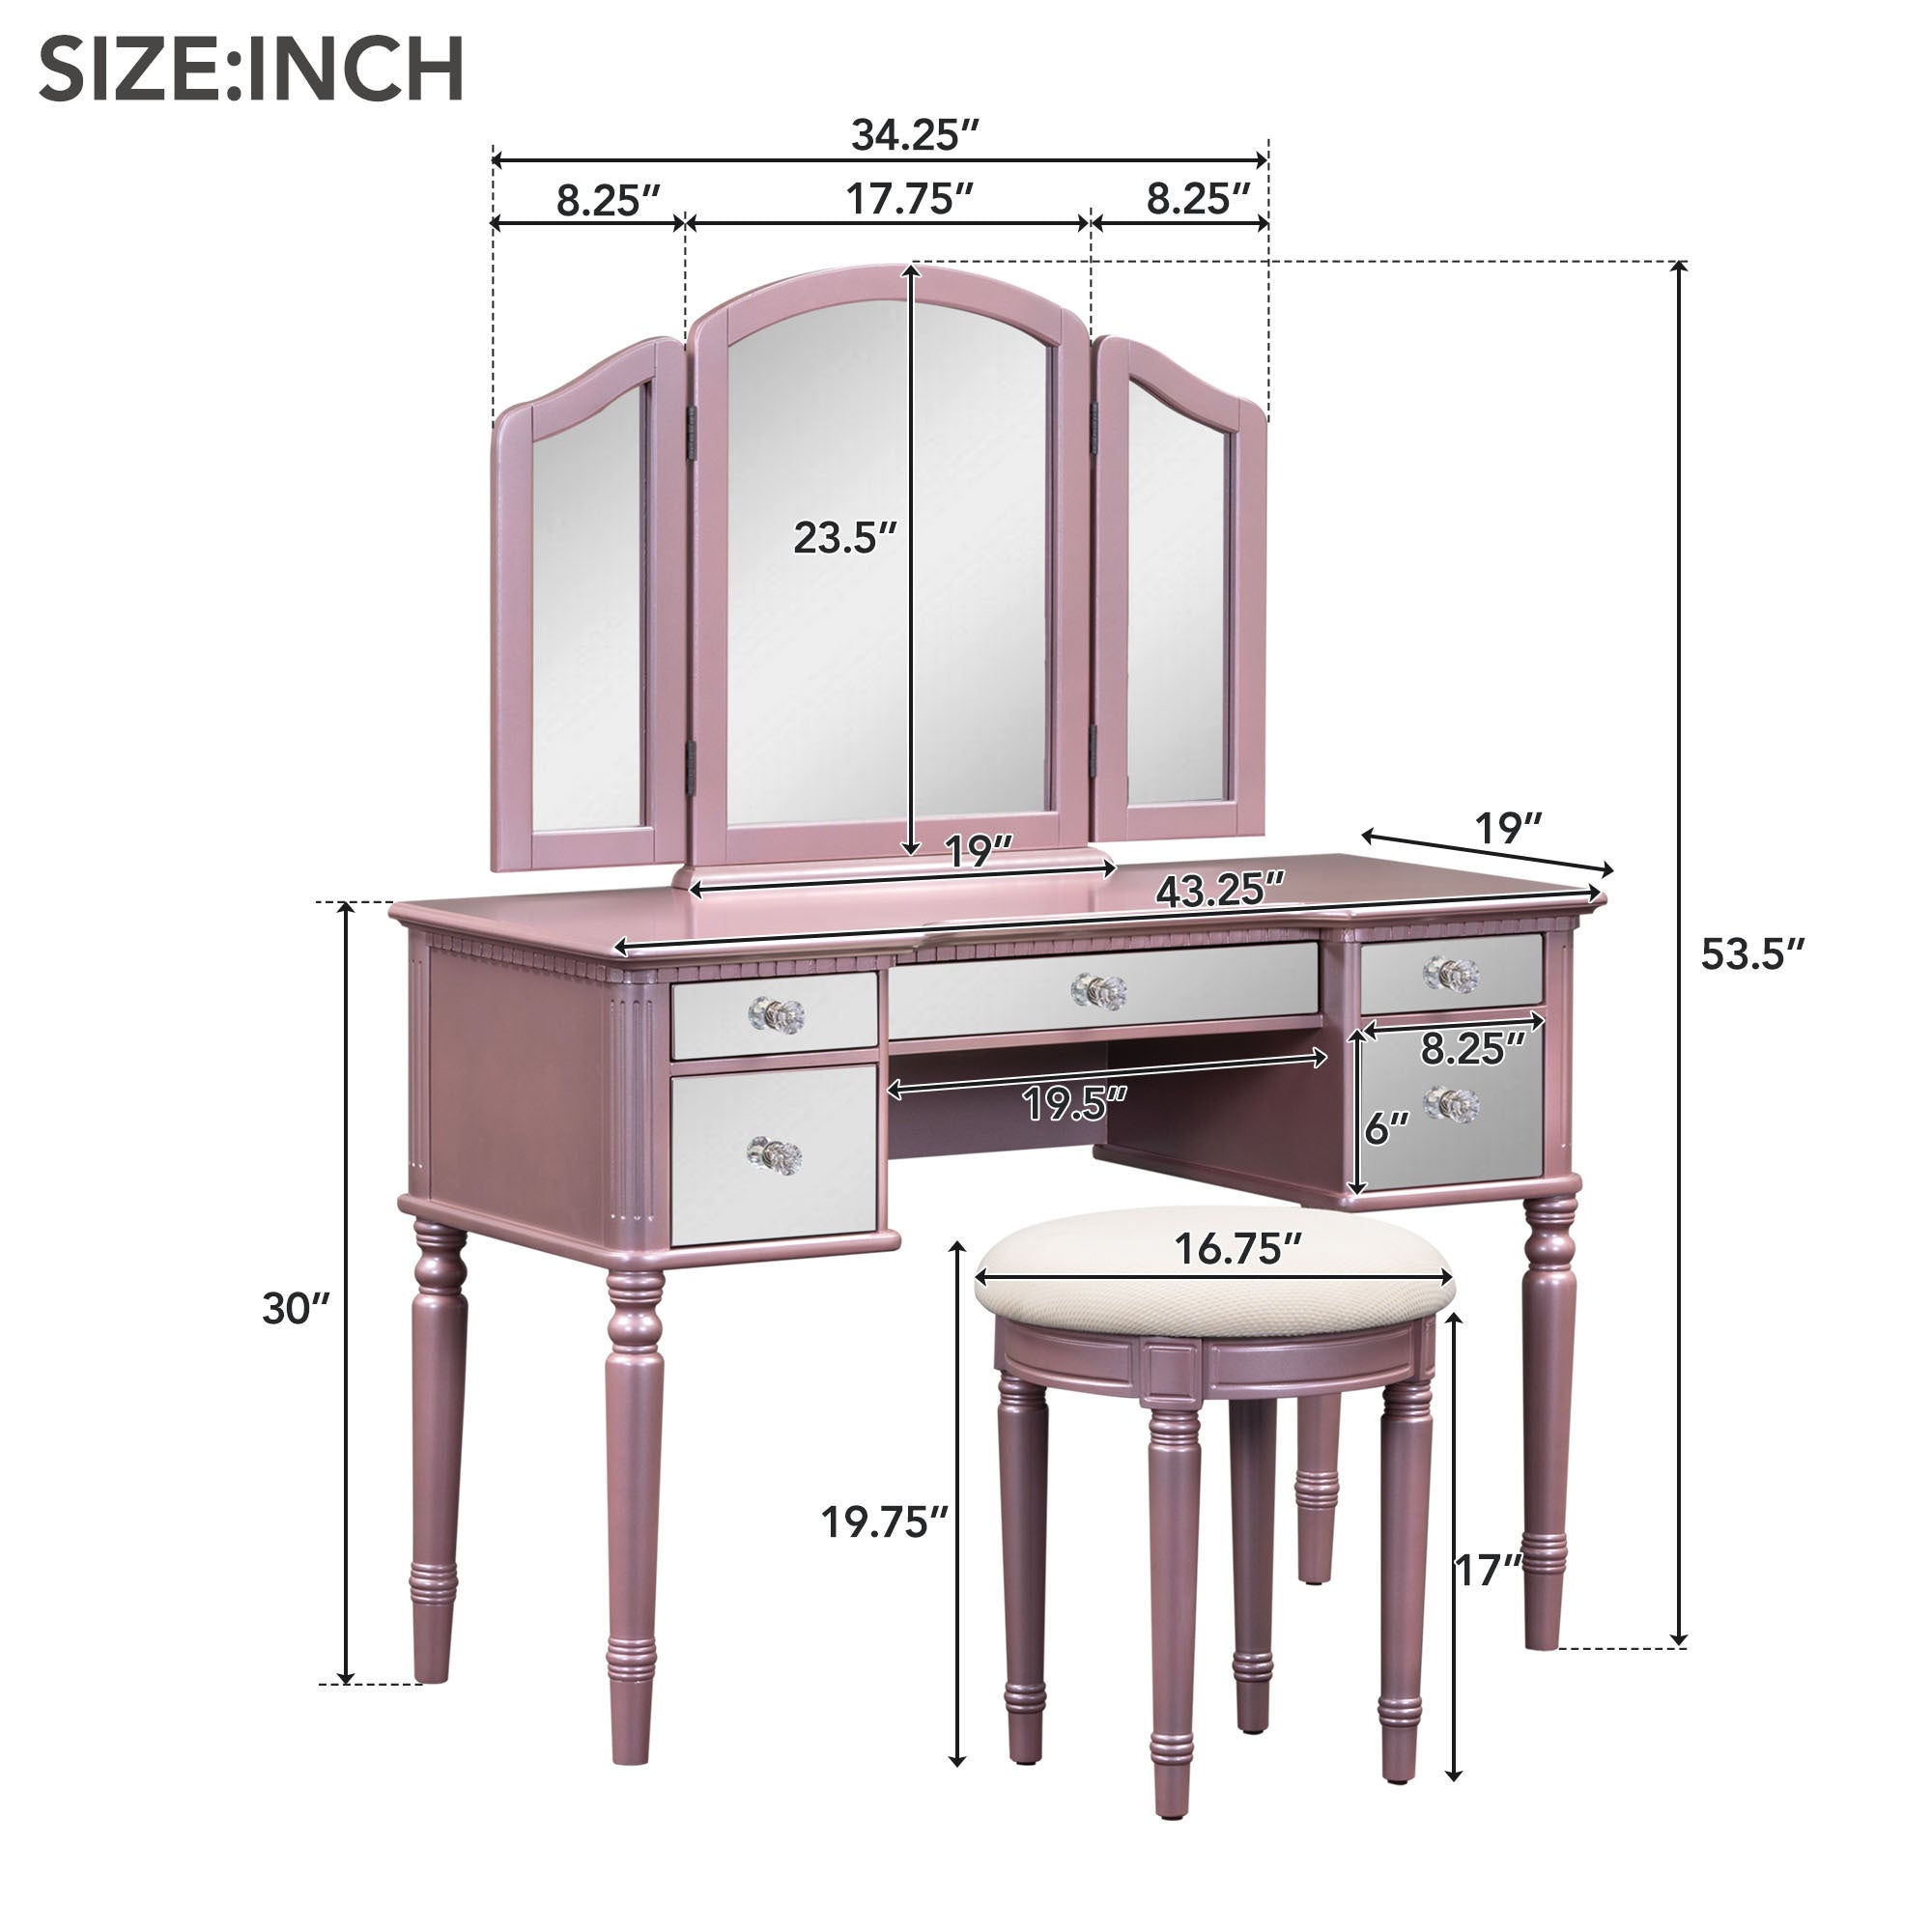 43" Makeup Vanity Set with Mirrored Drawers and Stool - Rose Gold